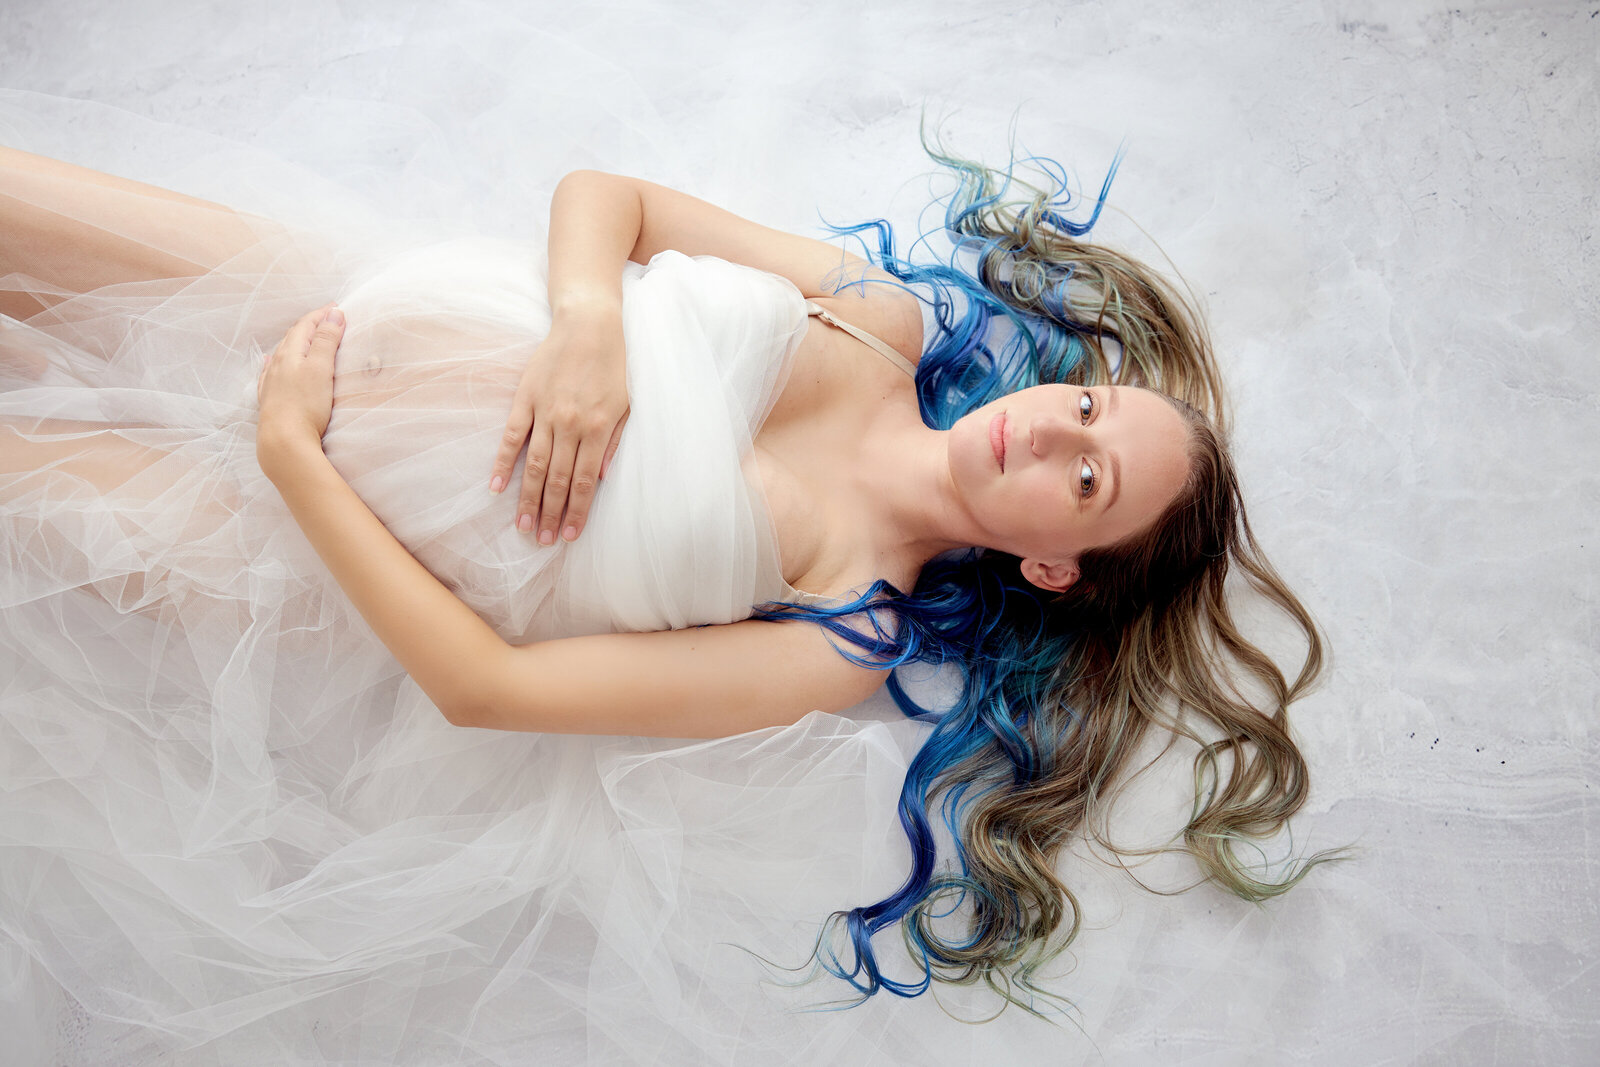 atlanta-best-maternity-pregnancy-portrait-studio-halo-white-on-white-flowing-gown-photography-photographer-twin-rivers-05